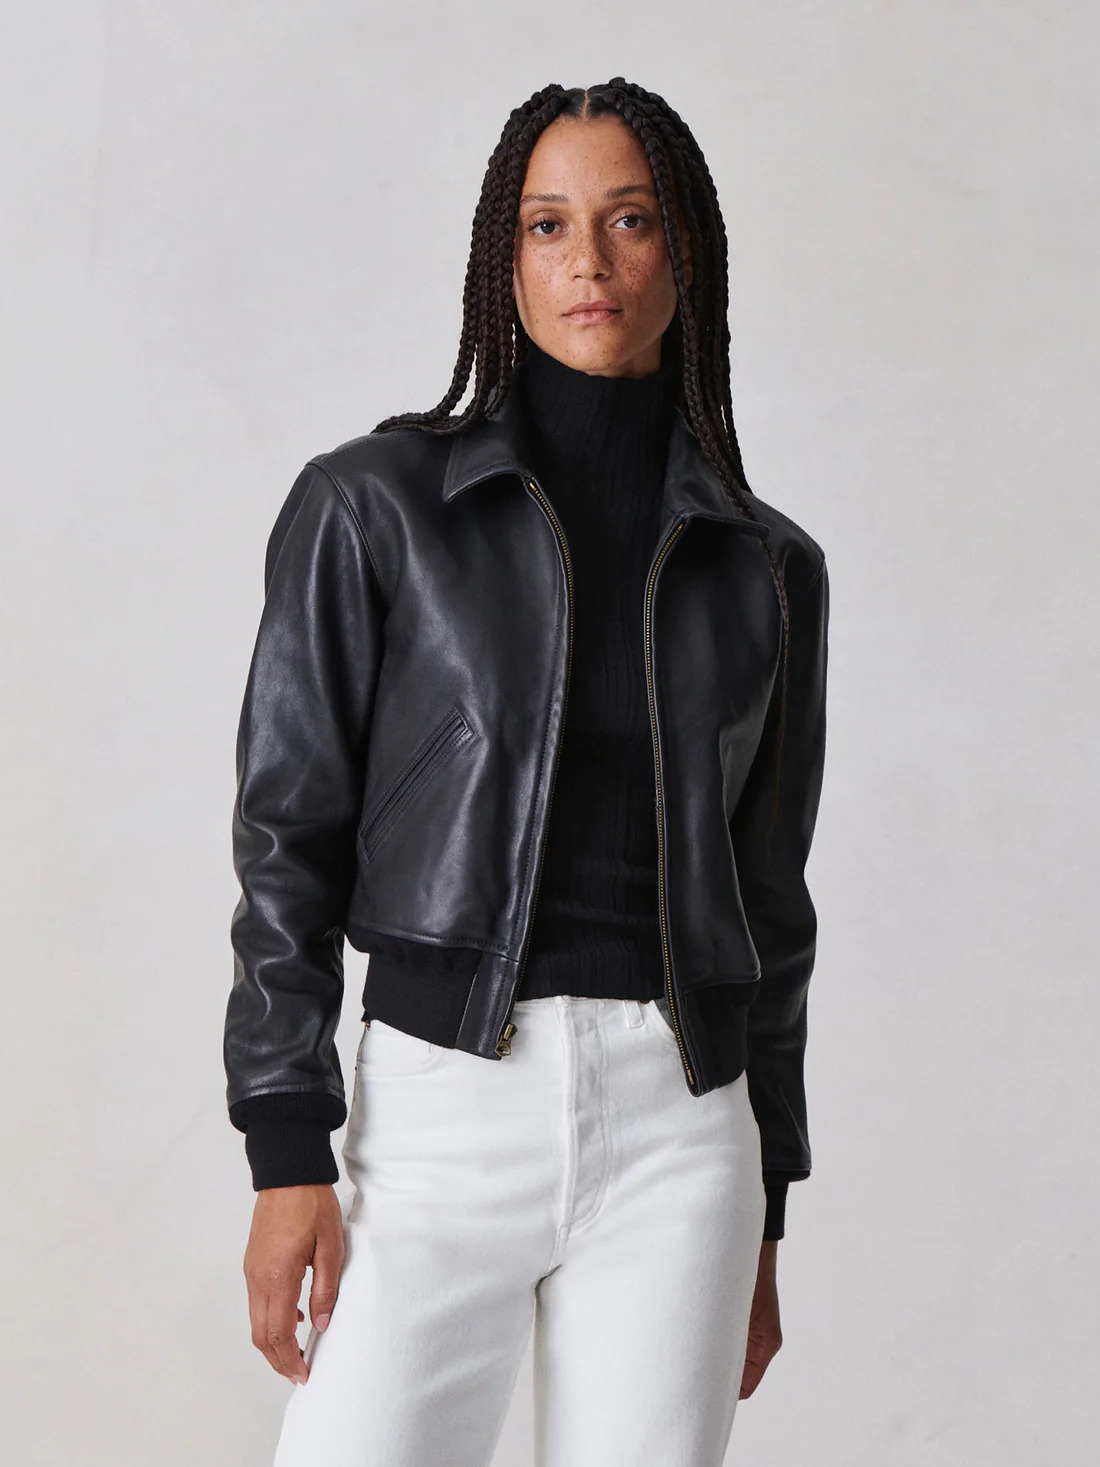 A model wearing a leather bomber jacket from Buck Mason.